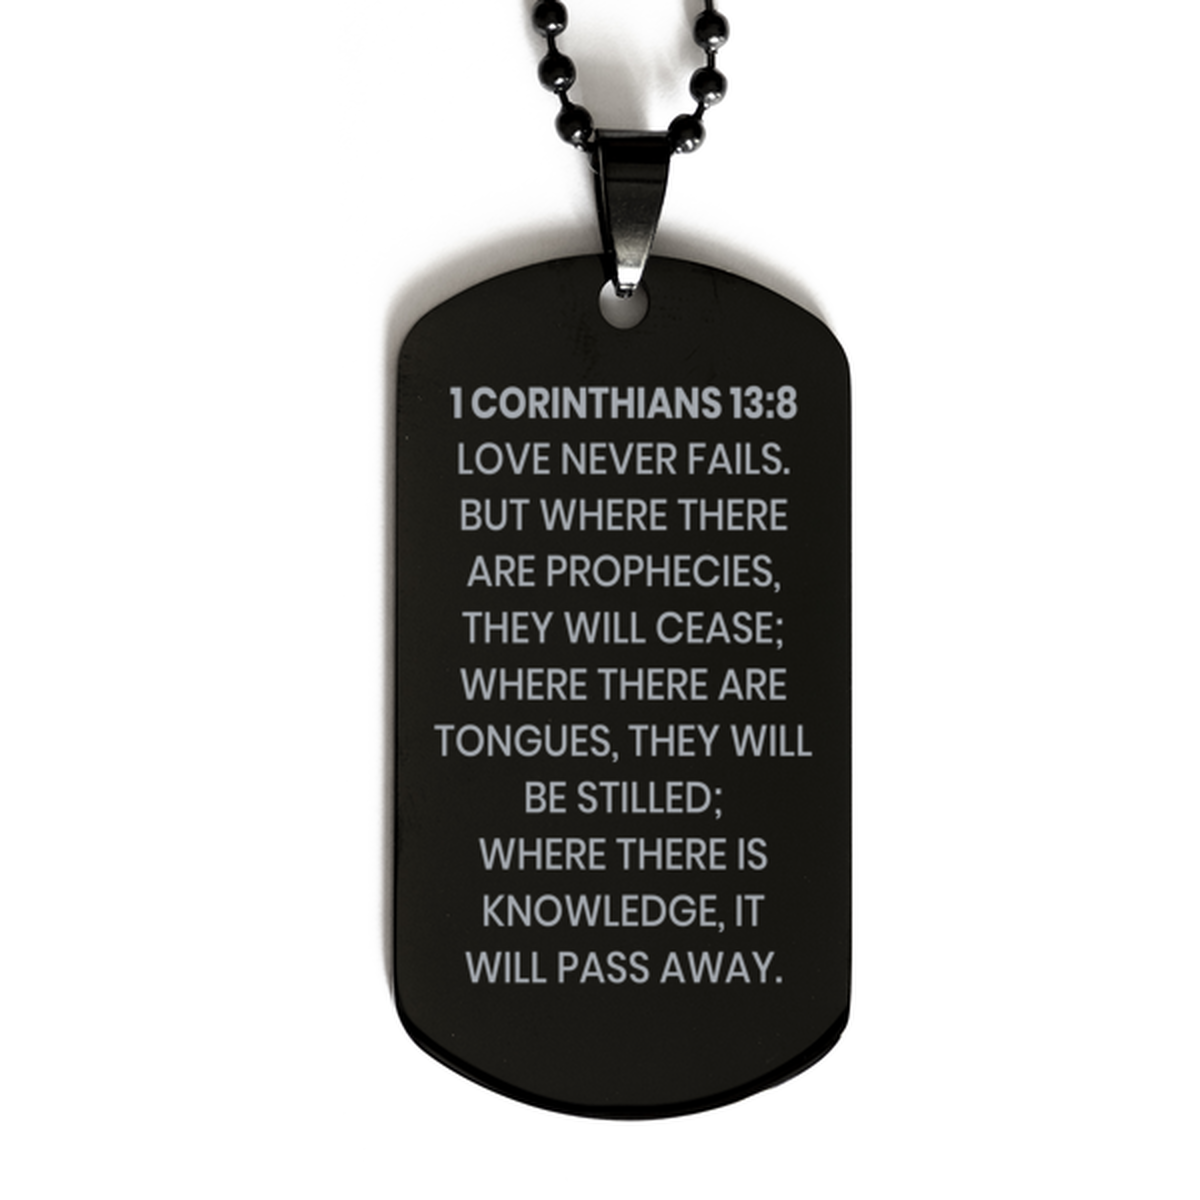 1 Corinthians 13:8 Necklace, Bible Verse Necklace, Christian Necklace, Christian Birthday Gift, Black Dog Tag Necklace, Gift for Christian.